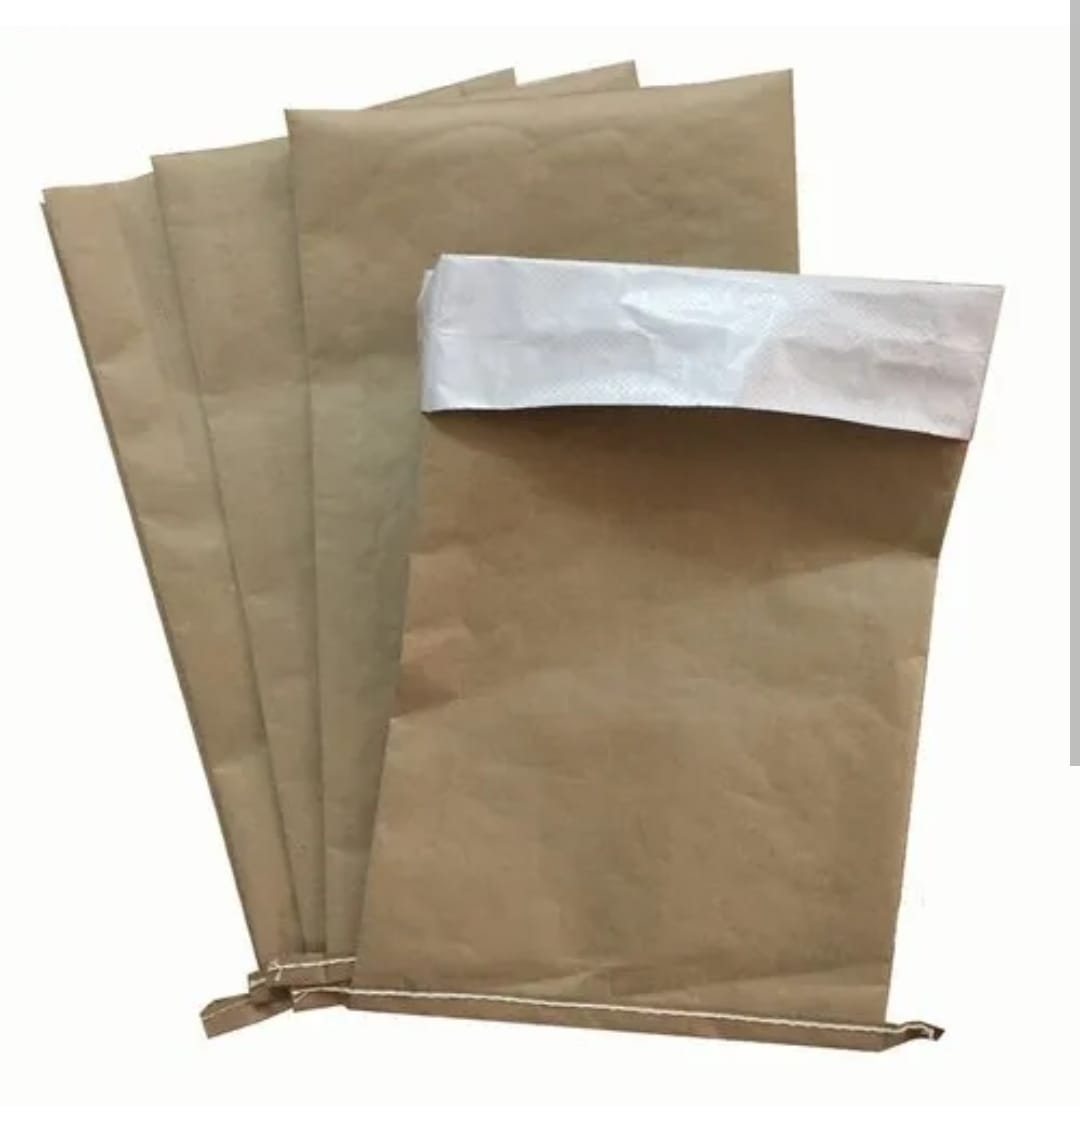 Wholesale Shopping Bags | Affordable and Durable Bags for Retailers |  ReanPackaging